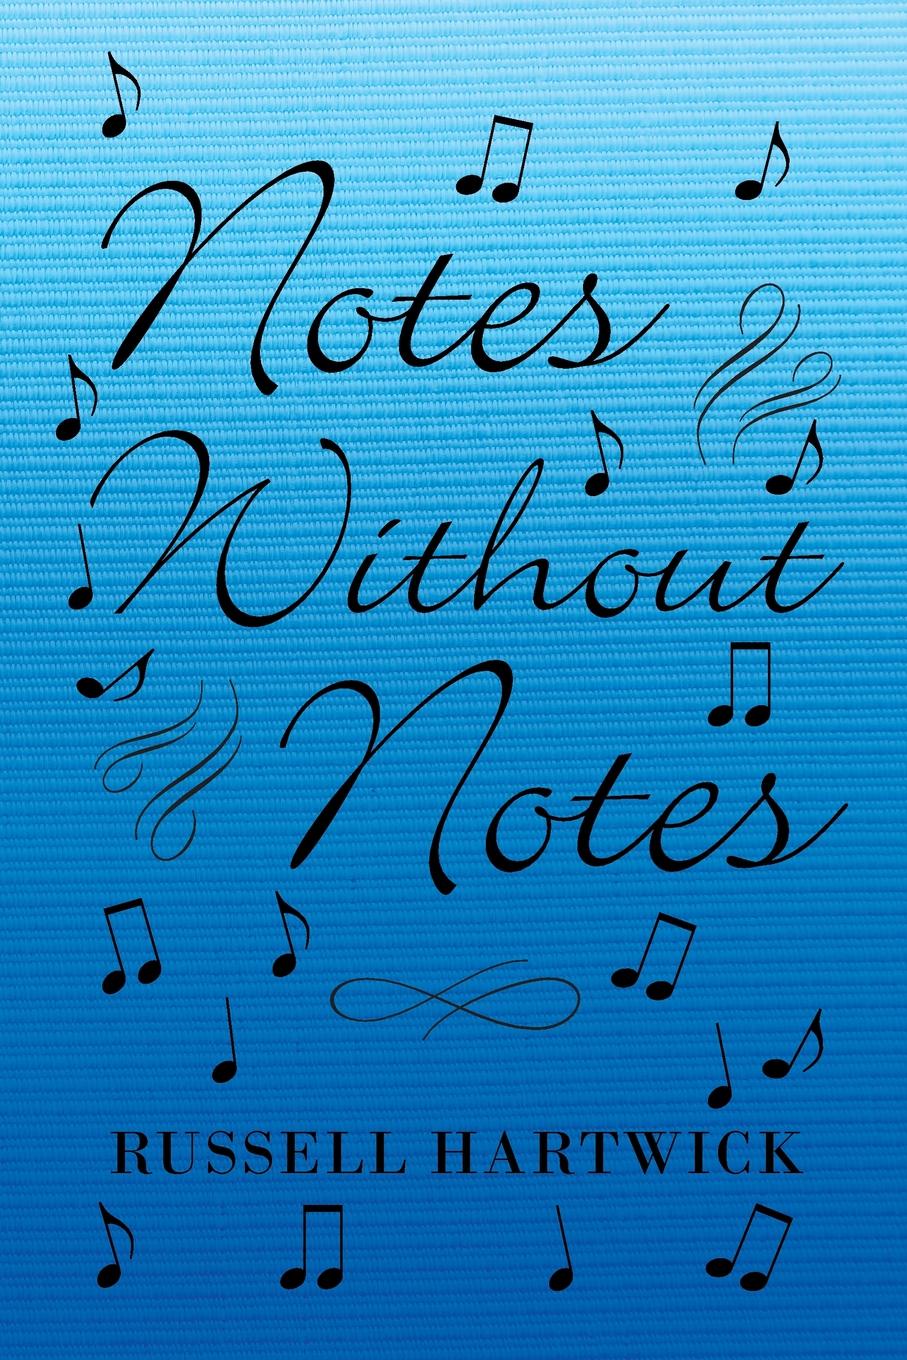 Without notes